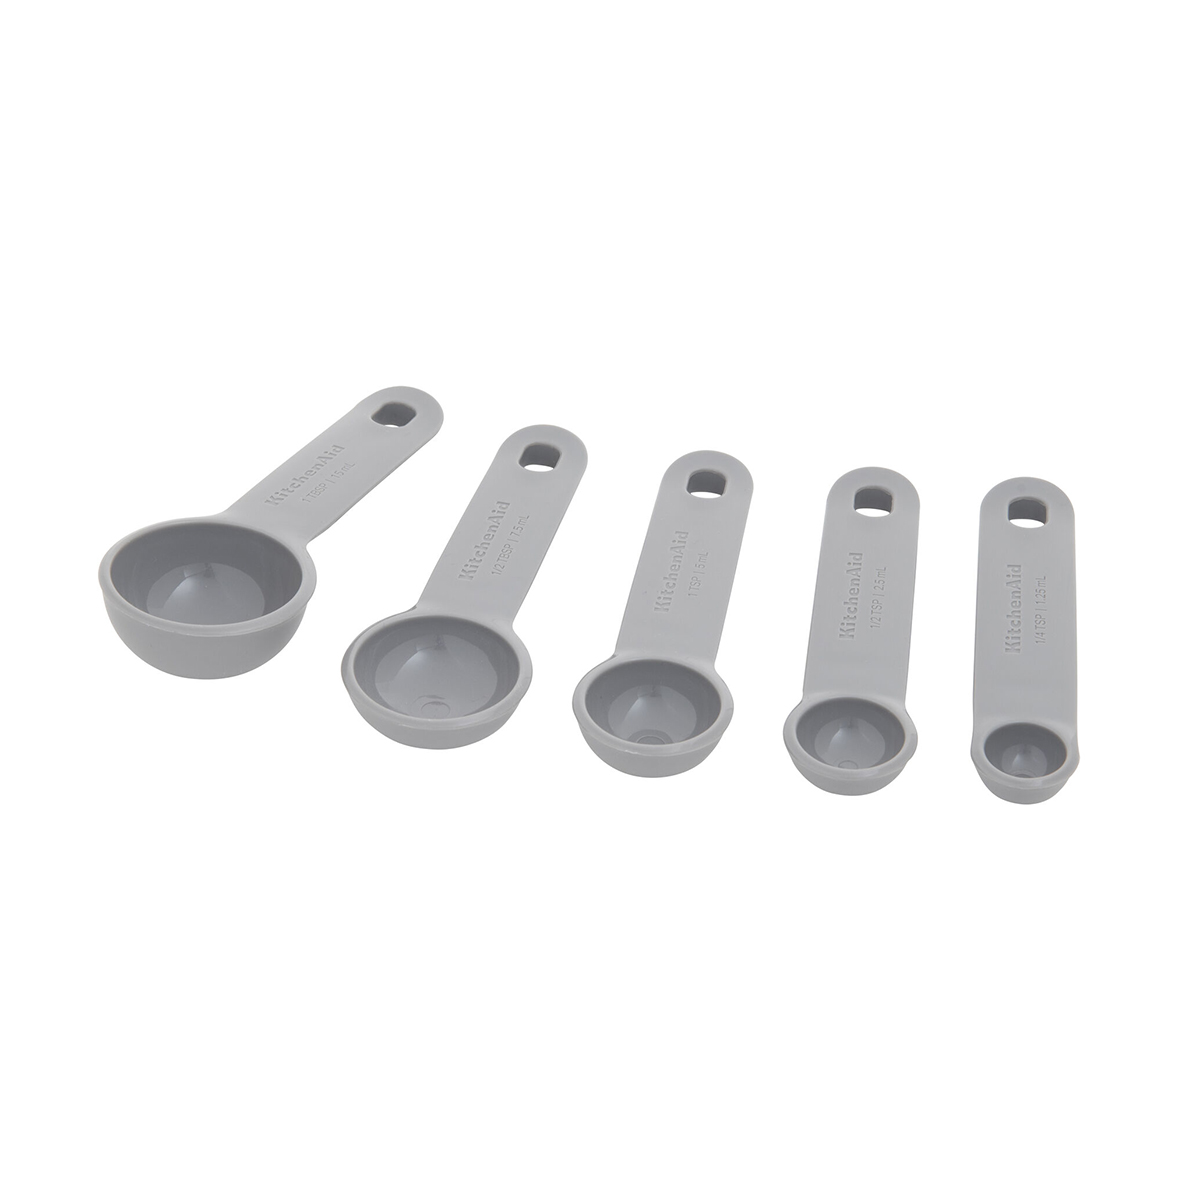 https://www.containerstore.com/catalogimages/427132/10085964-KitchenAid-Measuring-Spoon-.jpg